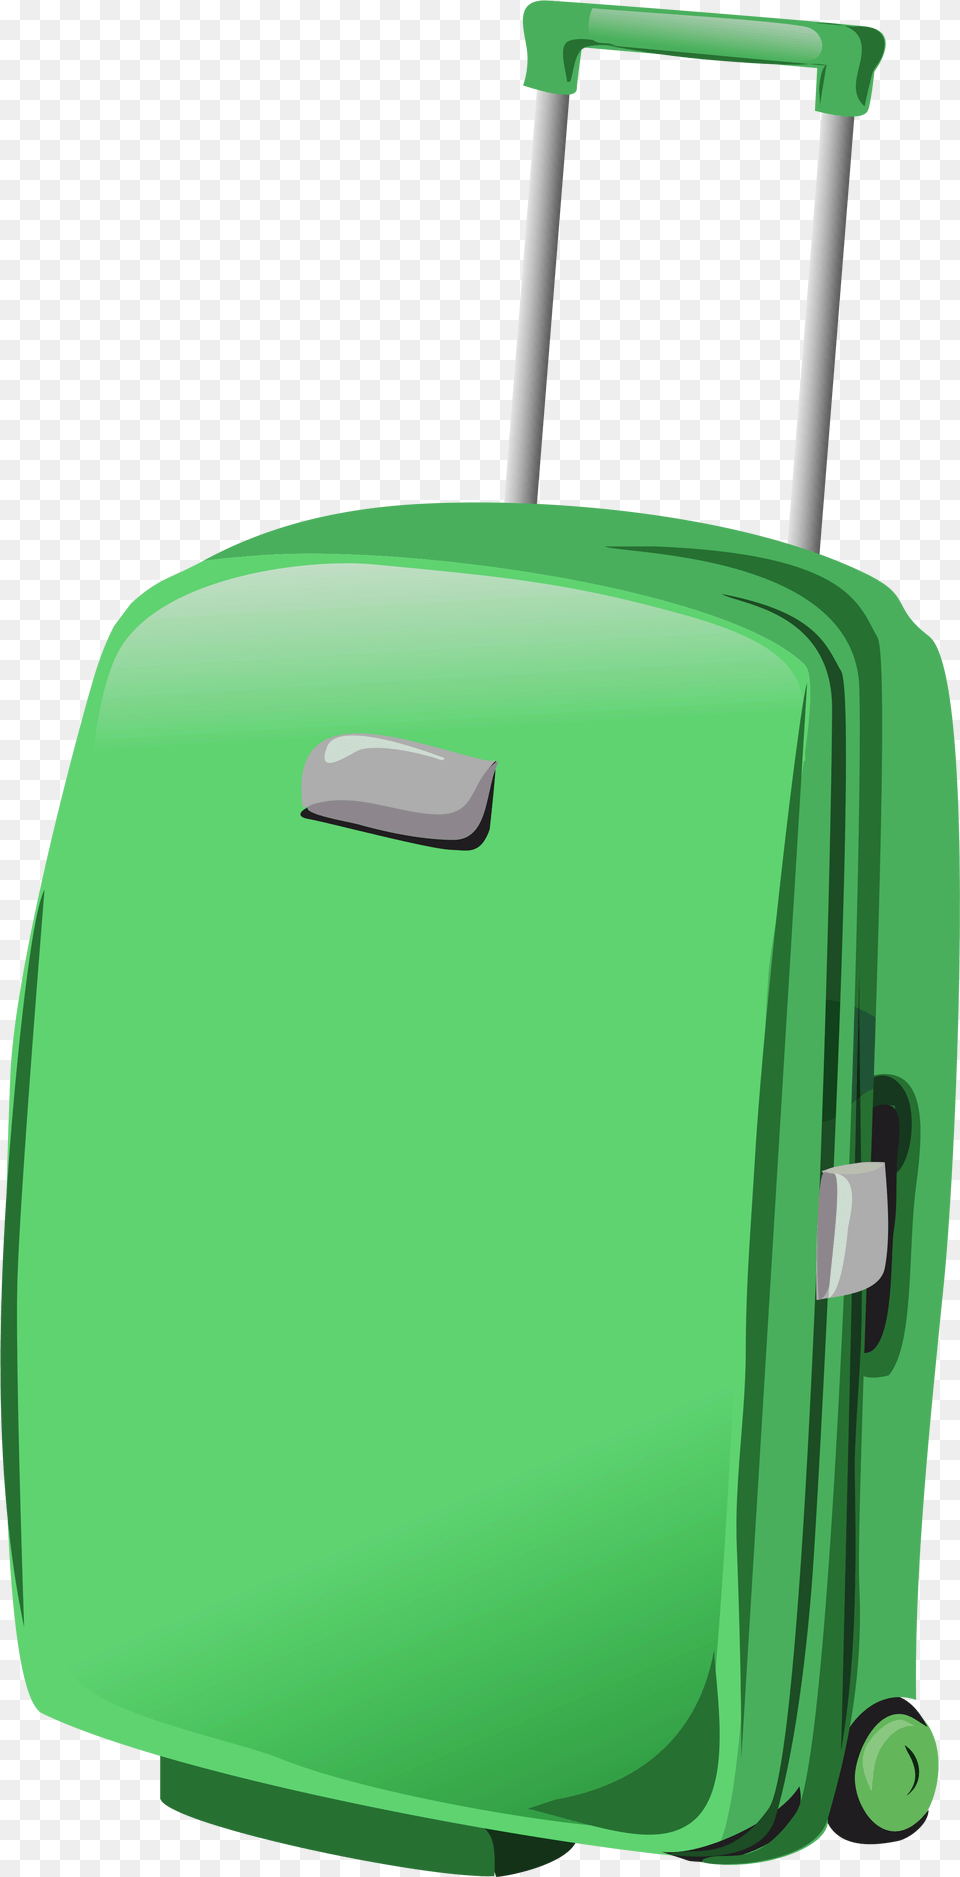 Green Suitcase Clipartu200b Gallery Yopriceville Background Luggage, Baggage Png